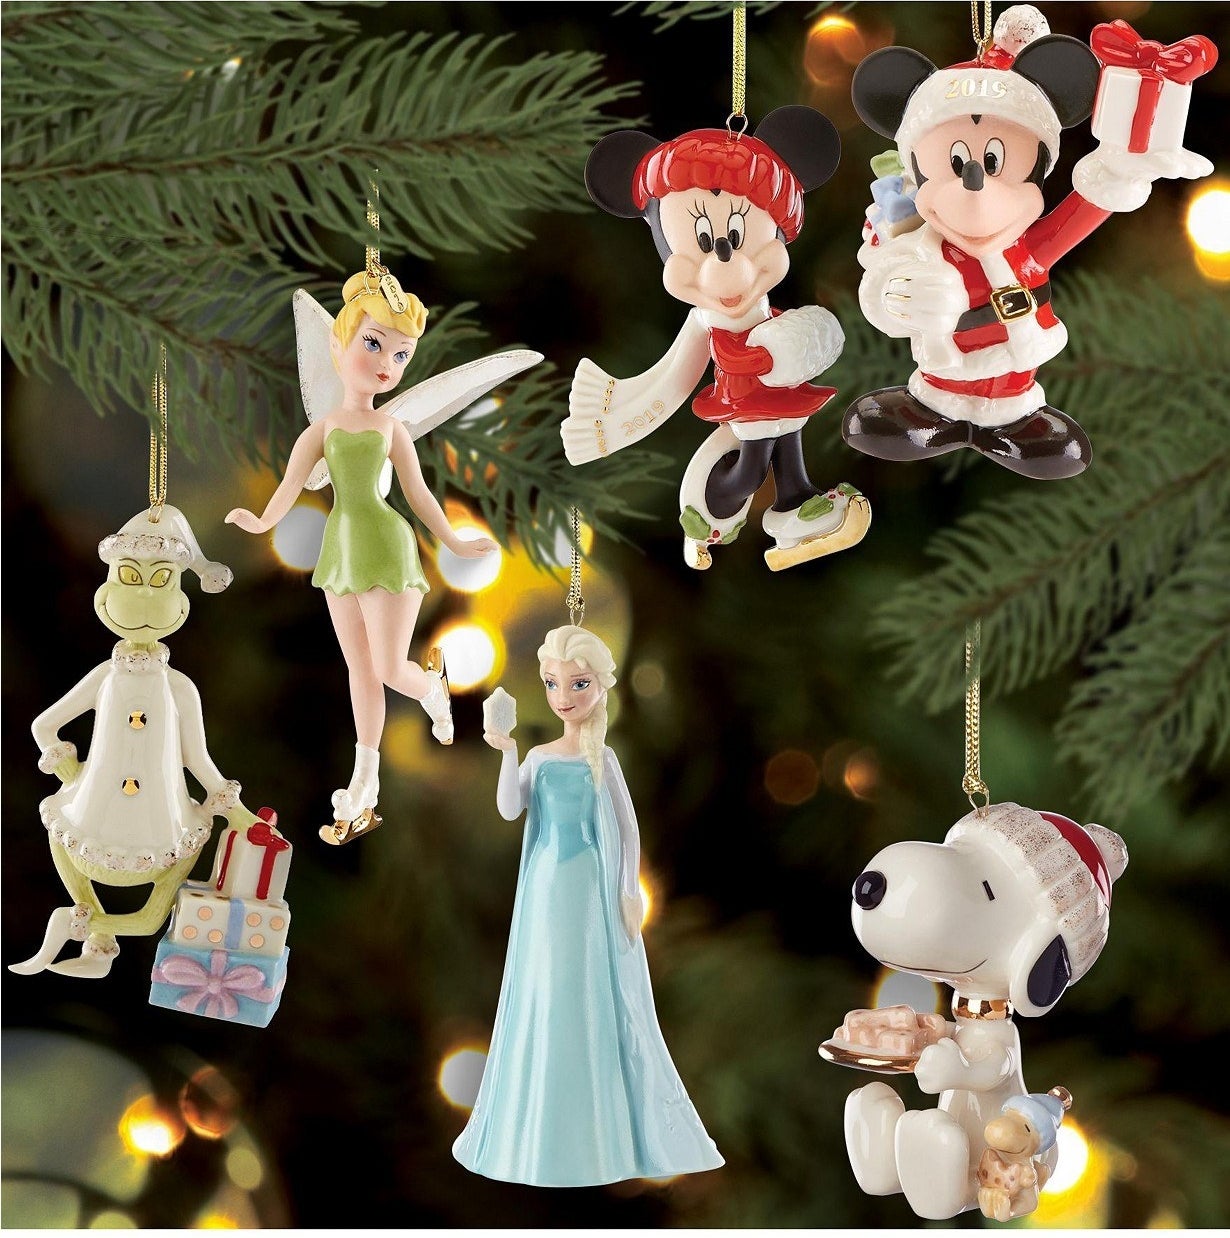 Elsa, Tinkerbell, The Grinch, Snoopy, and Mickey and Minnie ornaments on a tree 